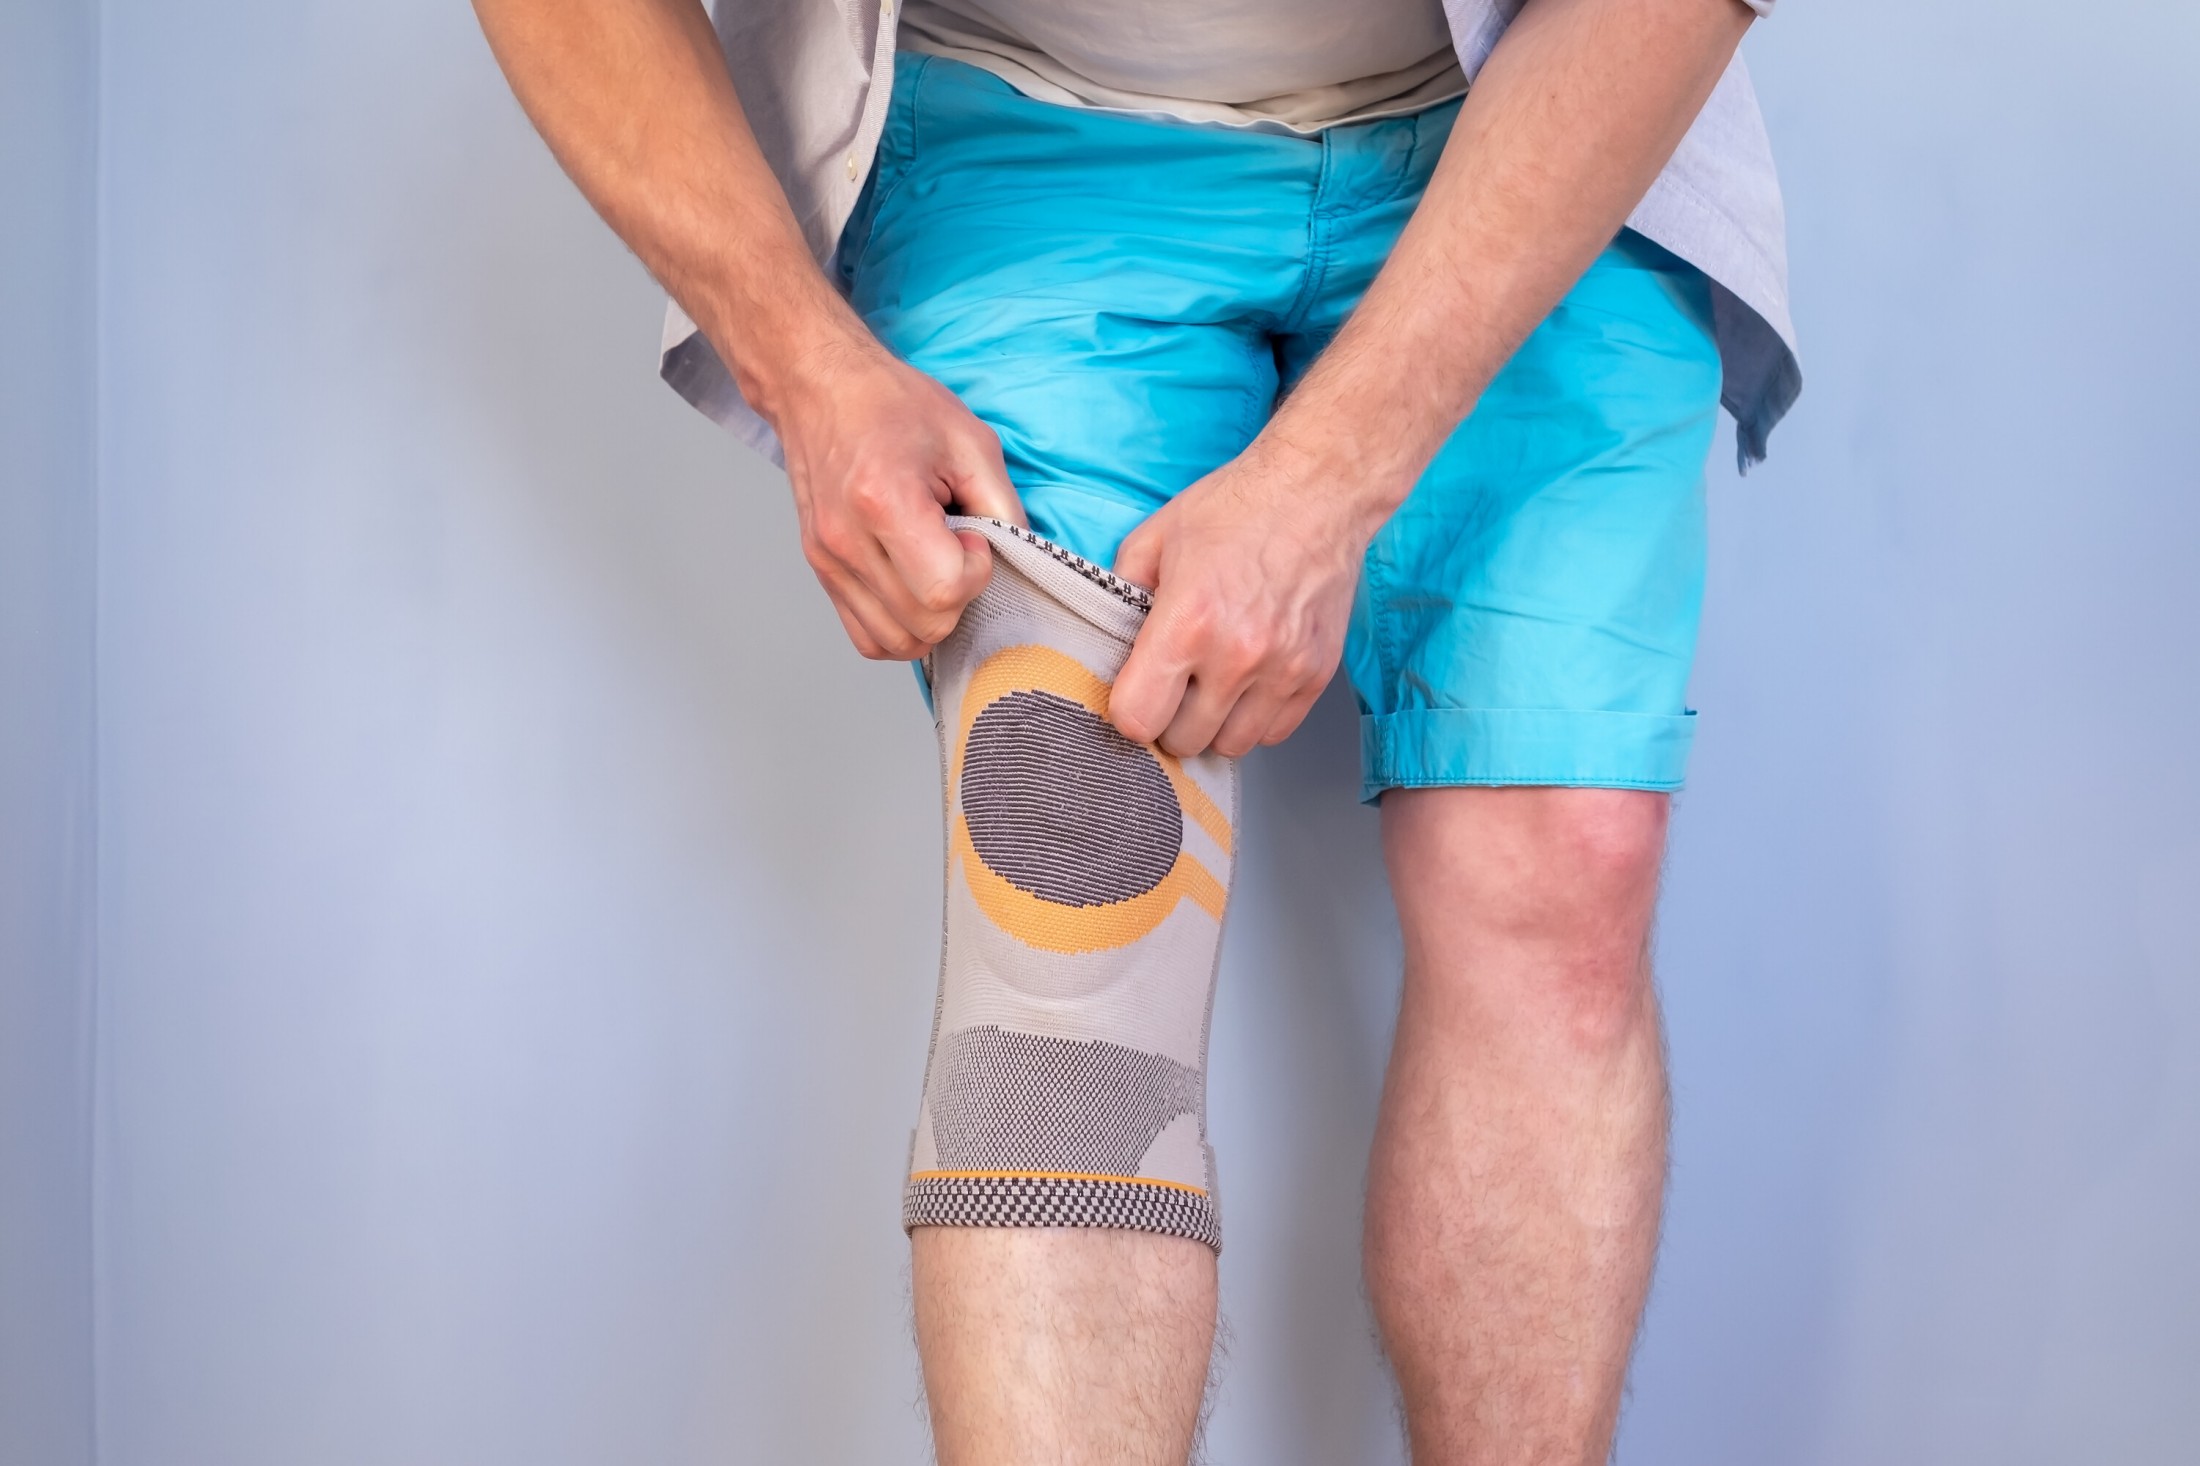 Knee Sleeves - Support and Comfort for Active Legs